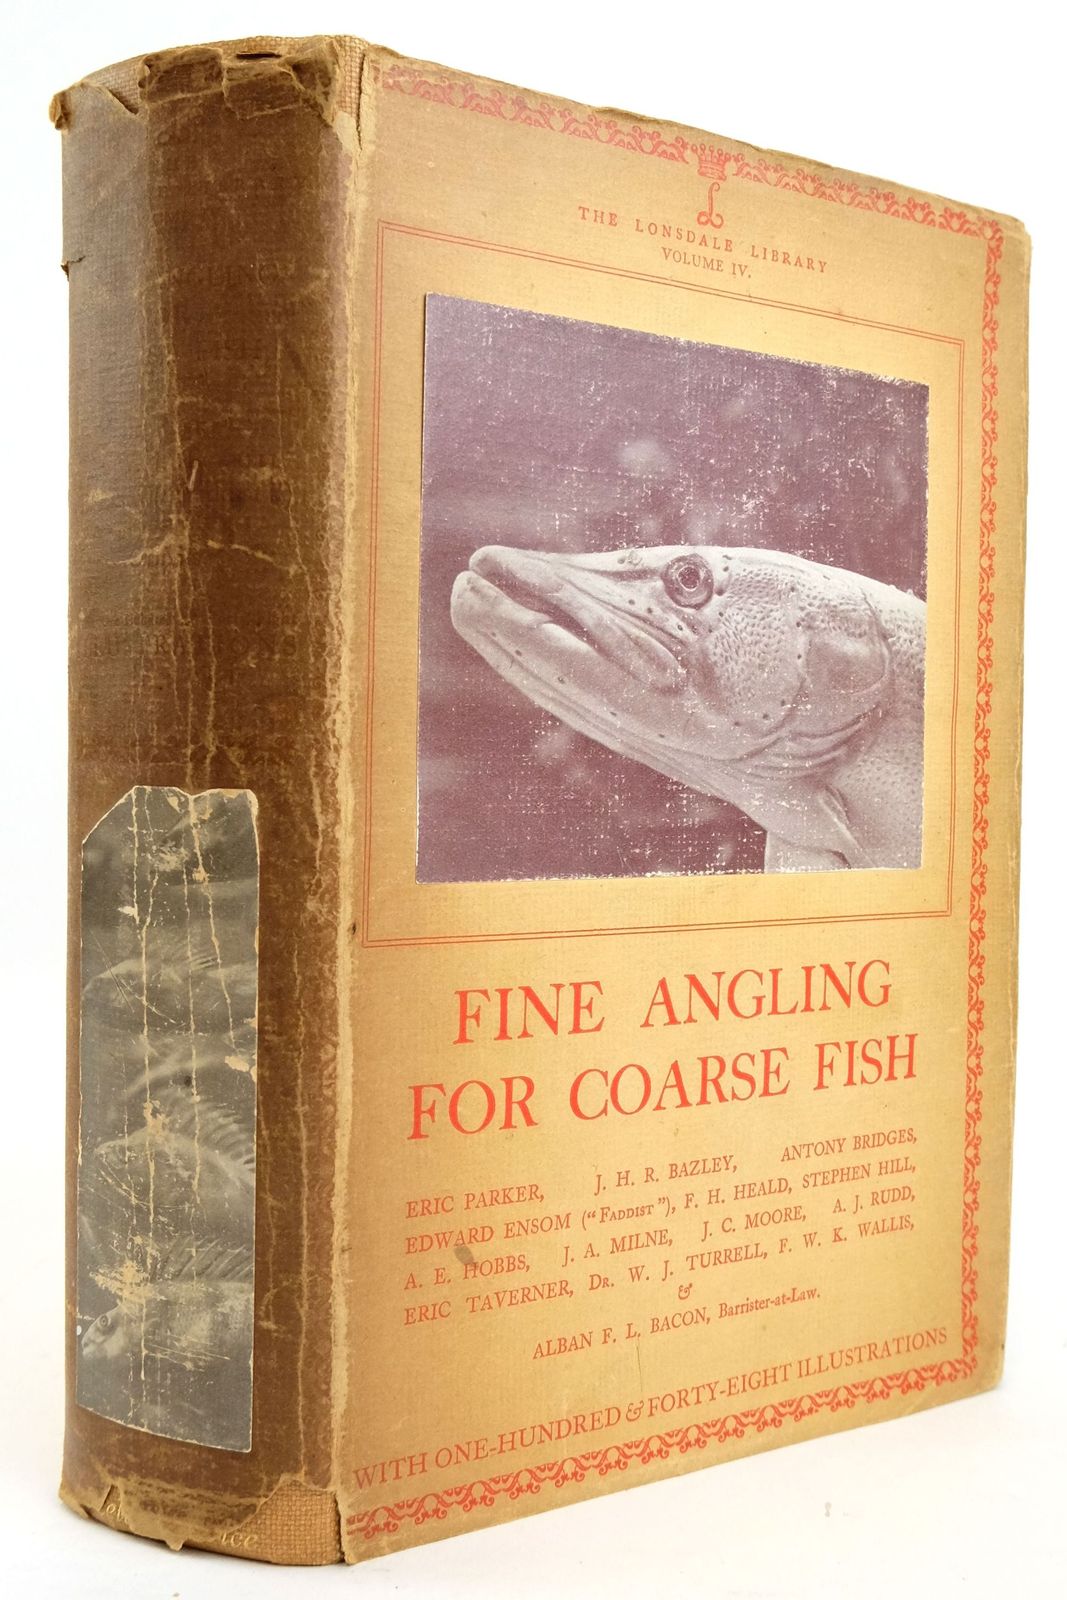 Photo of FINE ANGLING FOR COARSE FISH - LONSDALE LIBRARY VOL IV written by Parker, Eric published by Seeley, Service &amp; Co. (STOCK CODE: 1820169)  for sale by Stella & Rose's Books